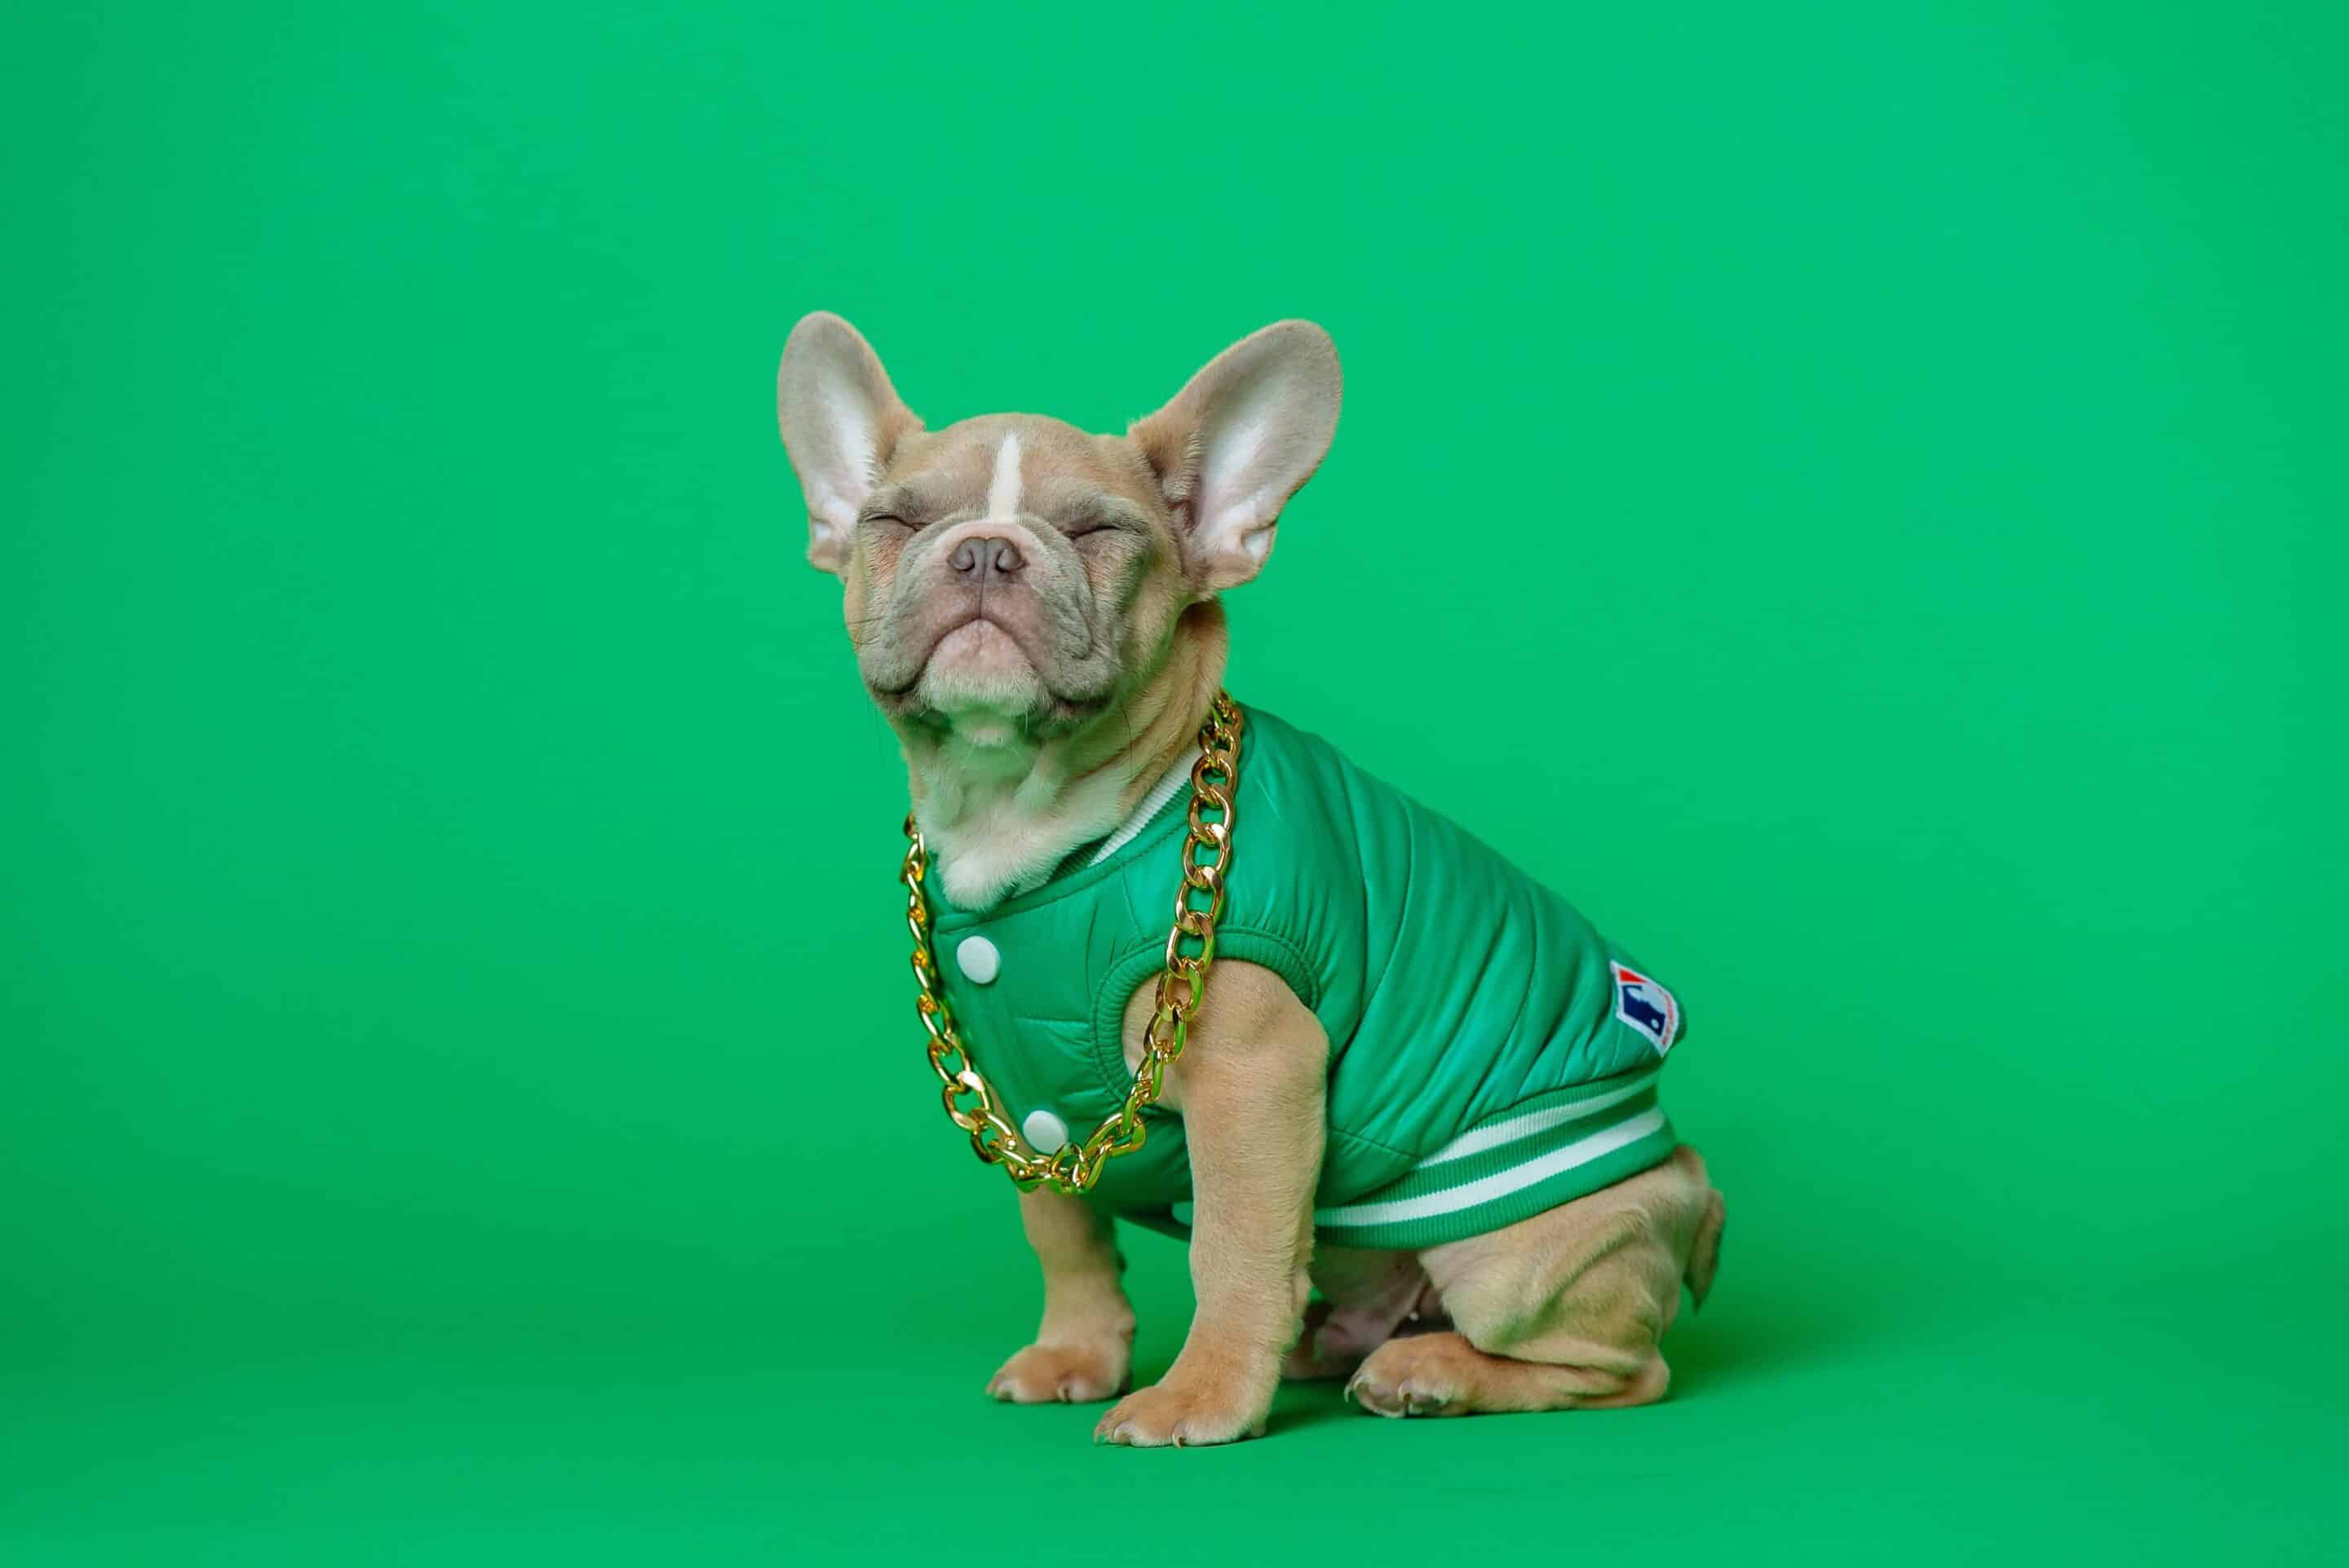 cute french bulldog puppy smiling with a chain and green hoodie in front of a green background